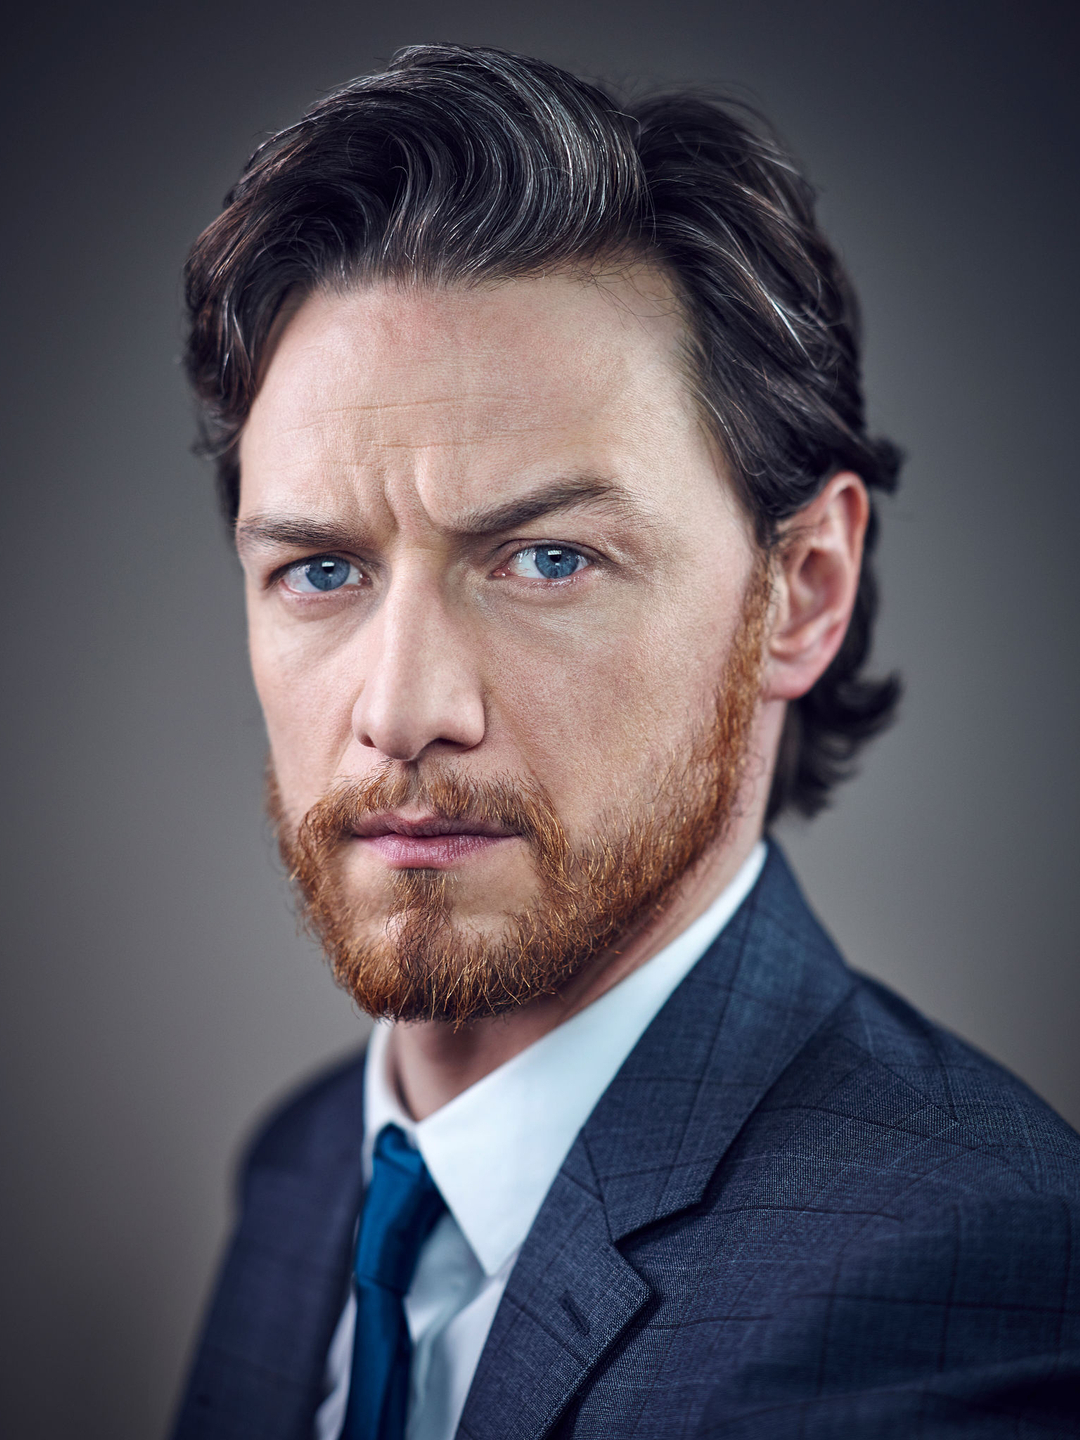 James McAvoy appearance